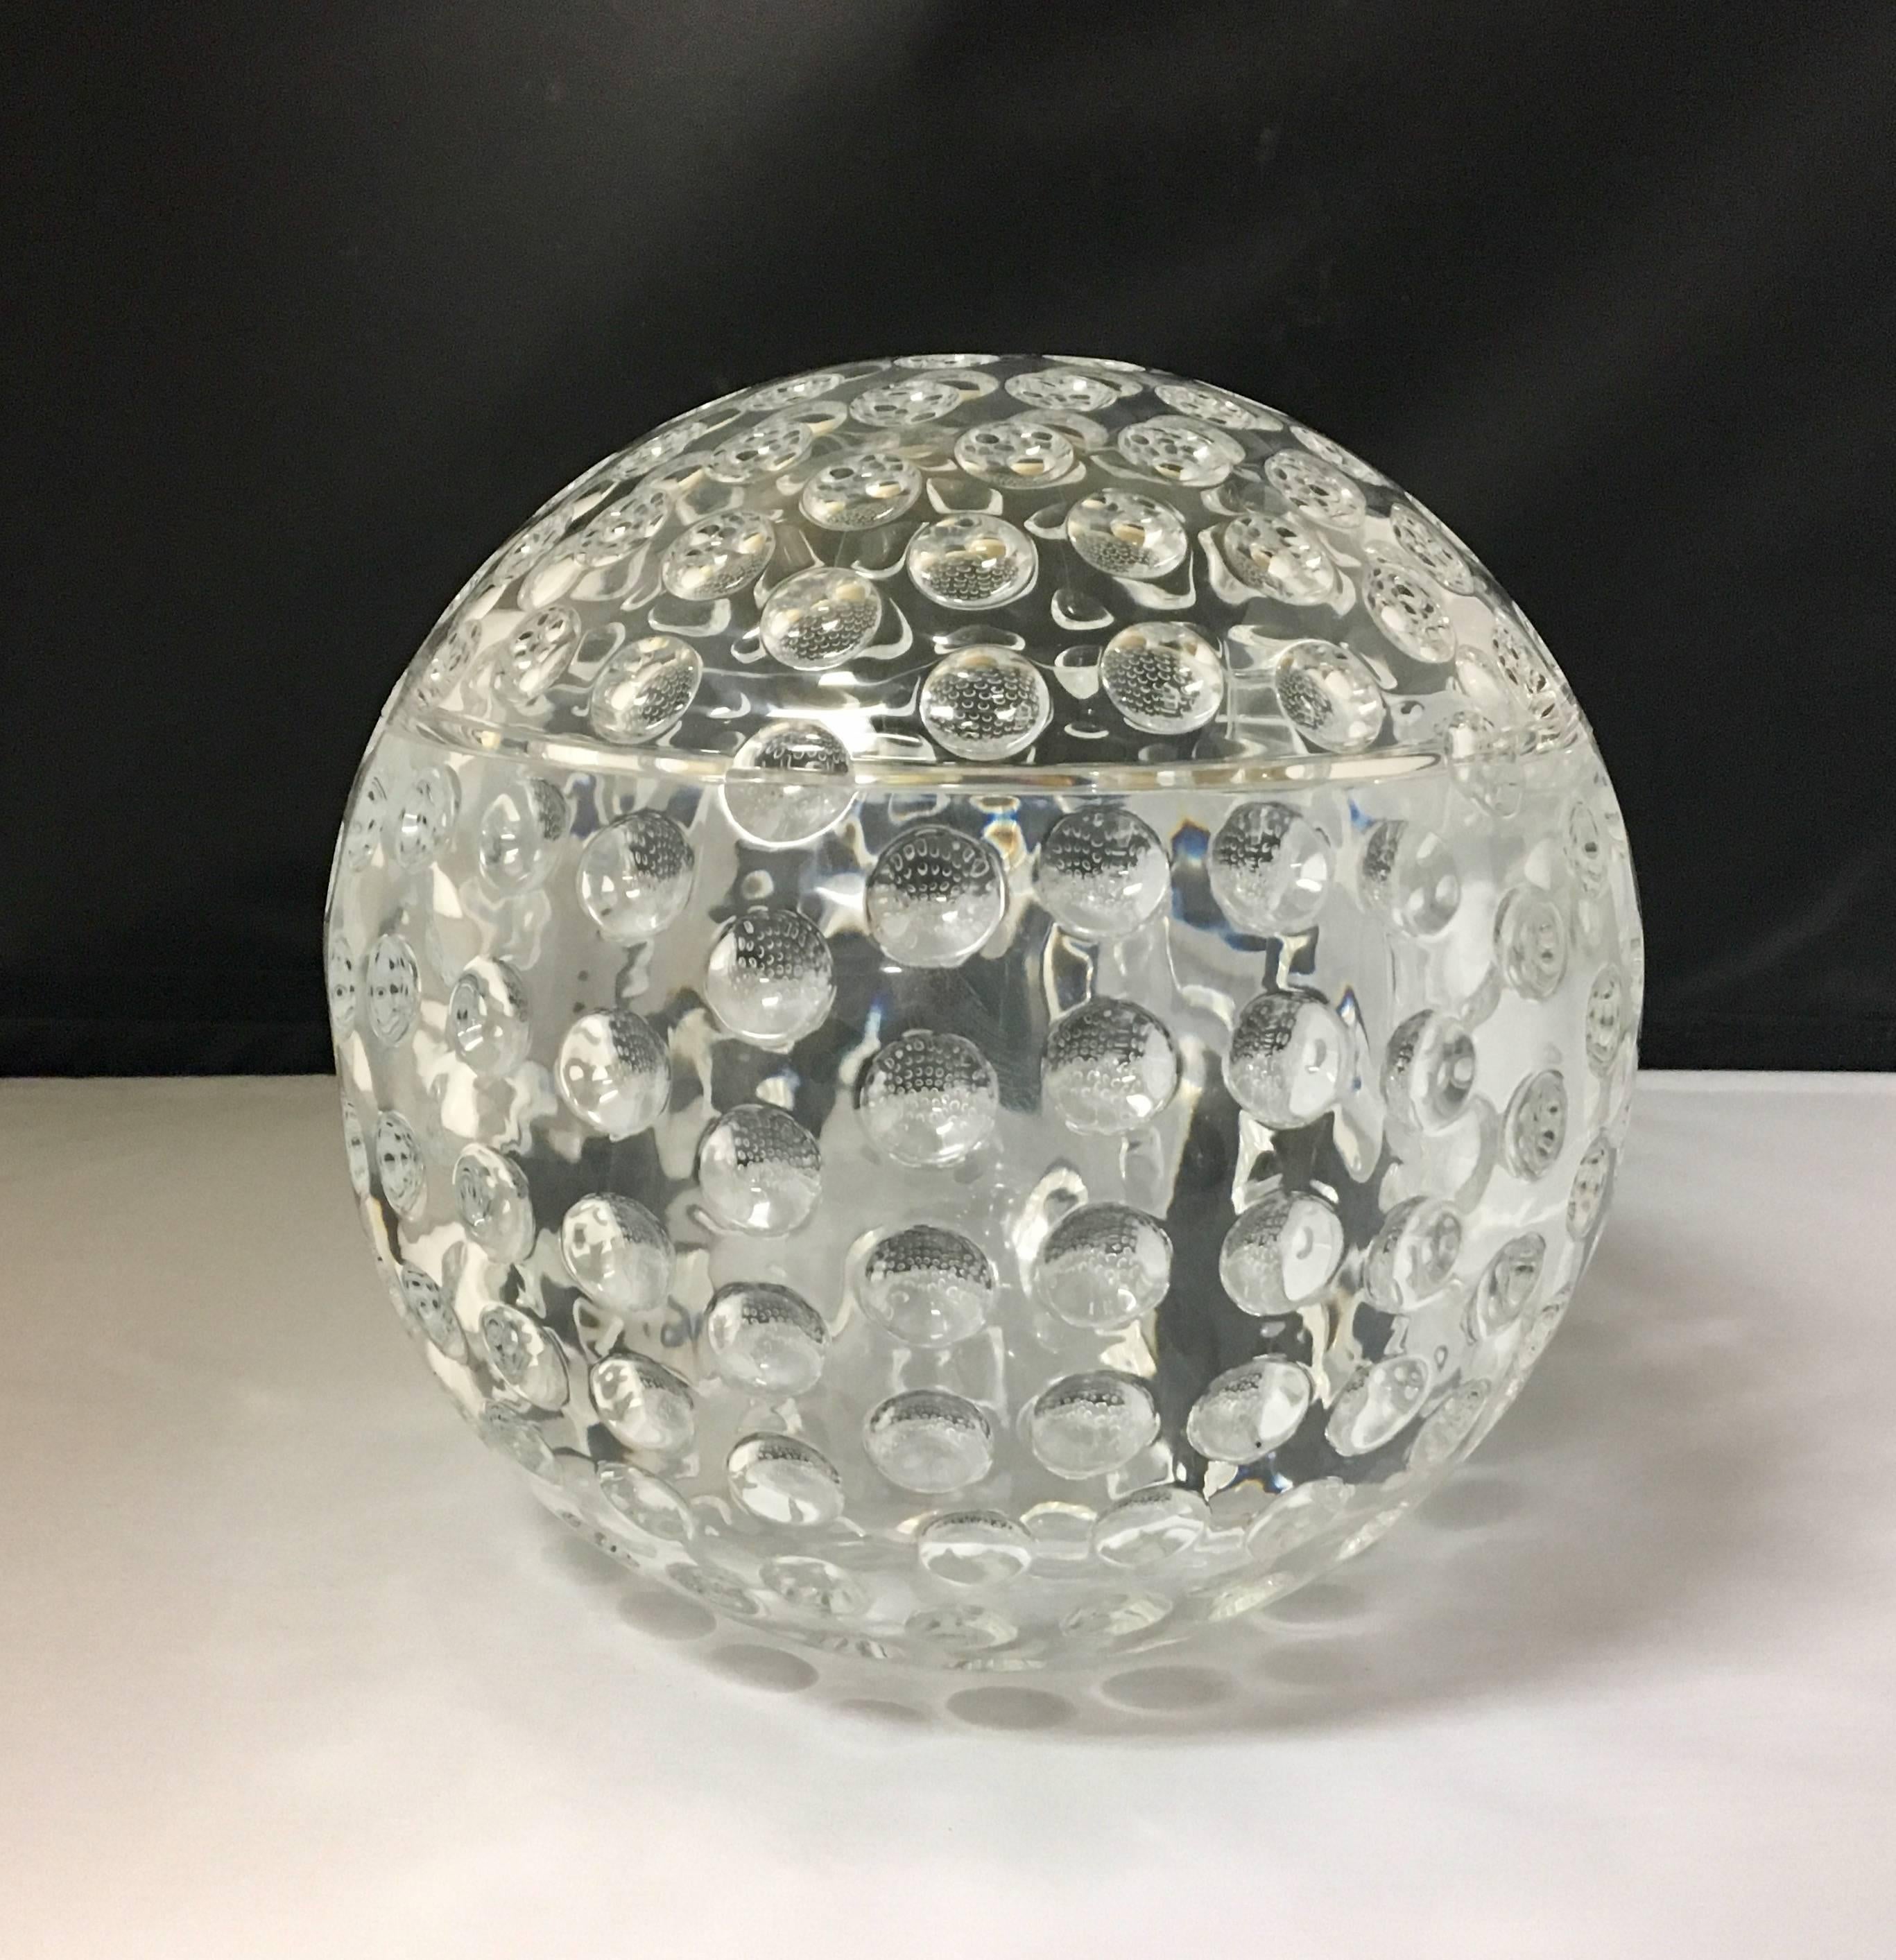 A very unique spherical ice bucket with bubble pattern, circa 1980s. Swivel top open or close mechanism. Excellent condition with no chips, cracks or scratches. Very nice functional design.